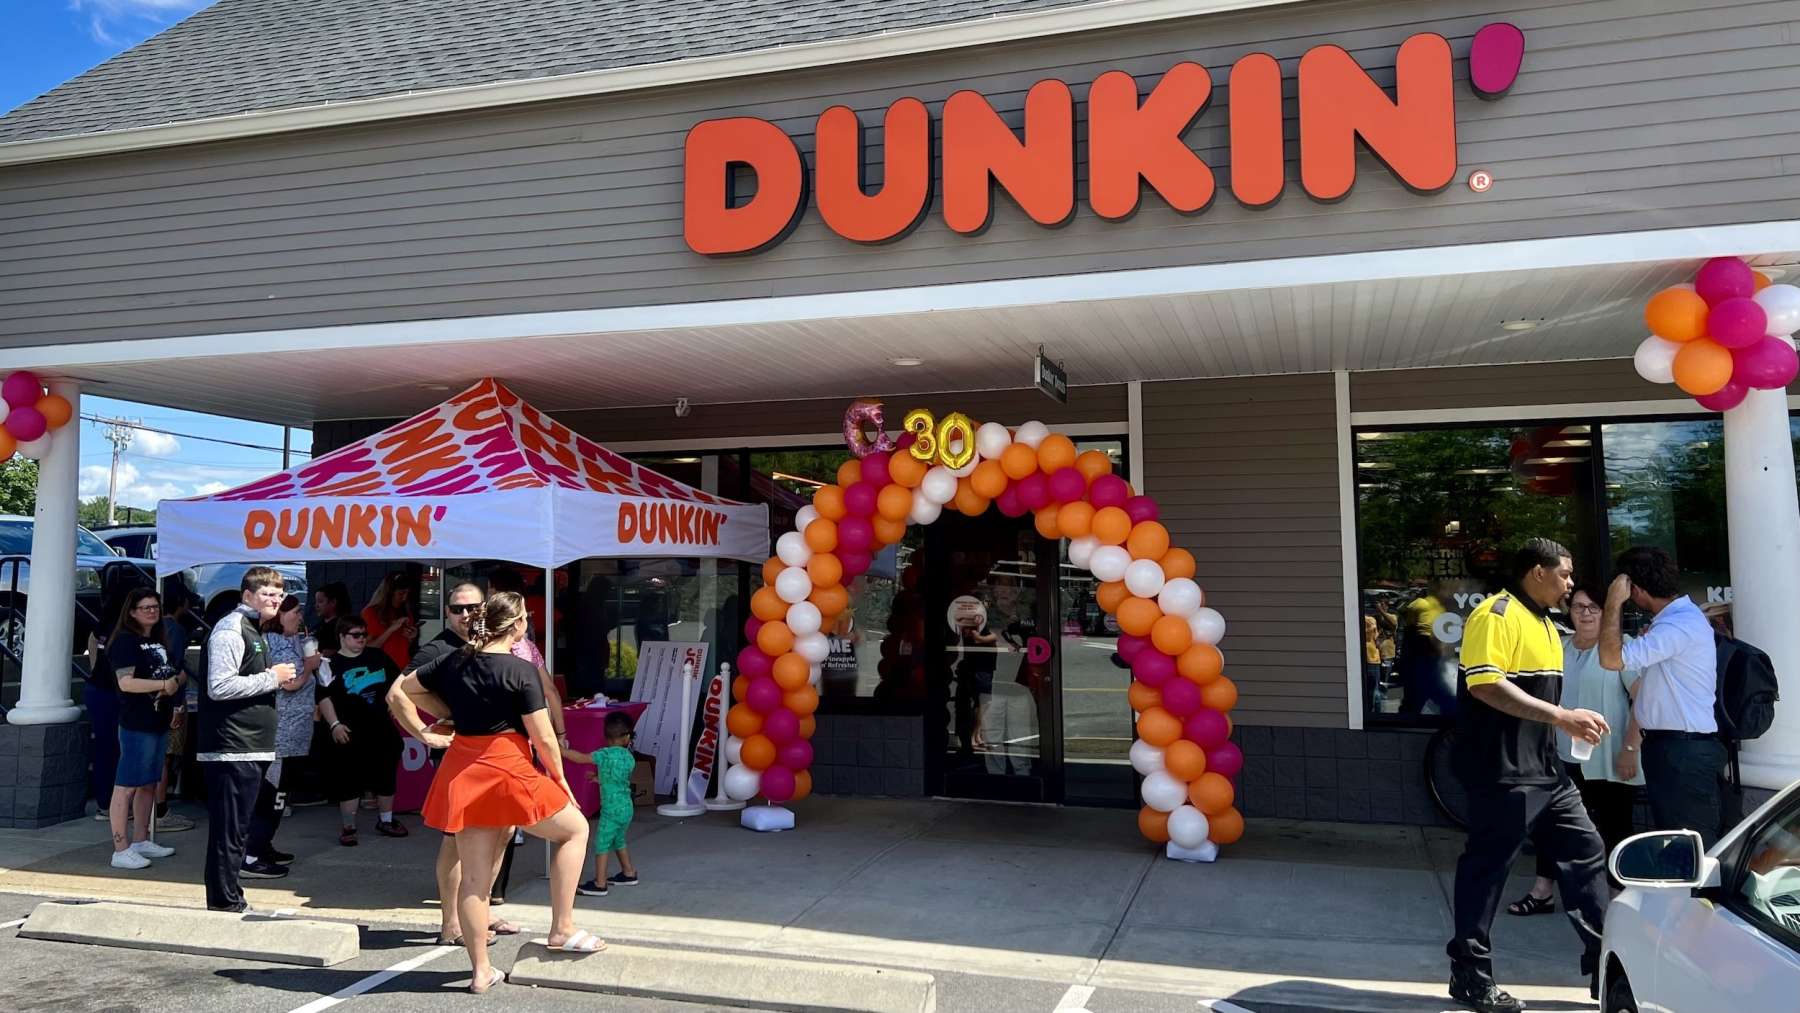 Rhode Island News: Typo for Dunkin’ promotion in Cranston offers free offer to “White” residents